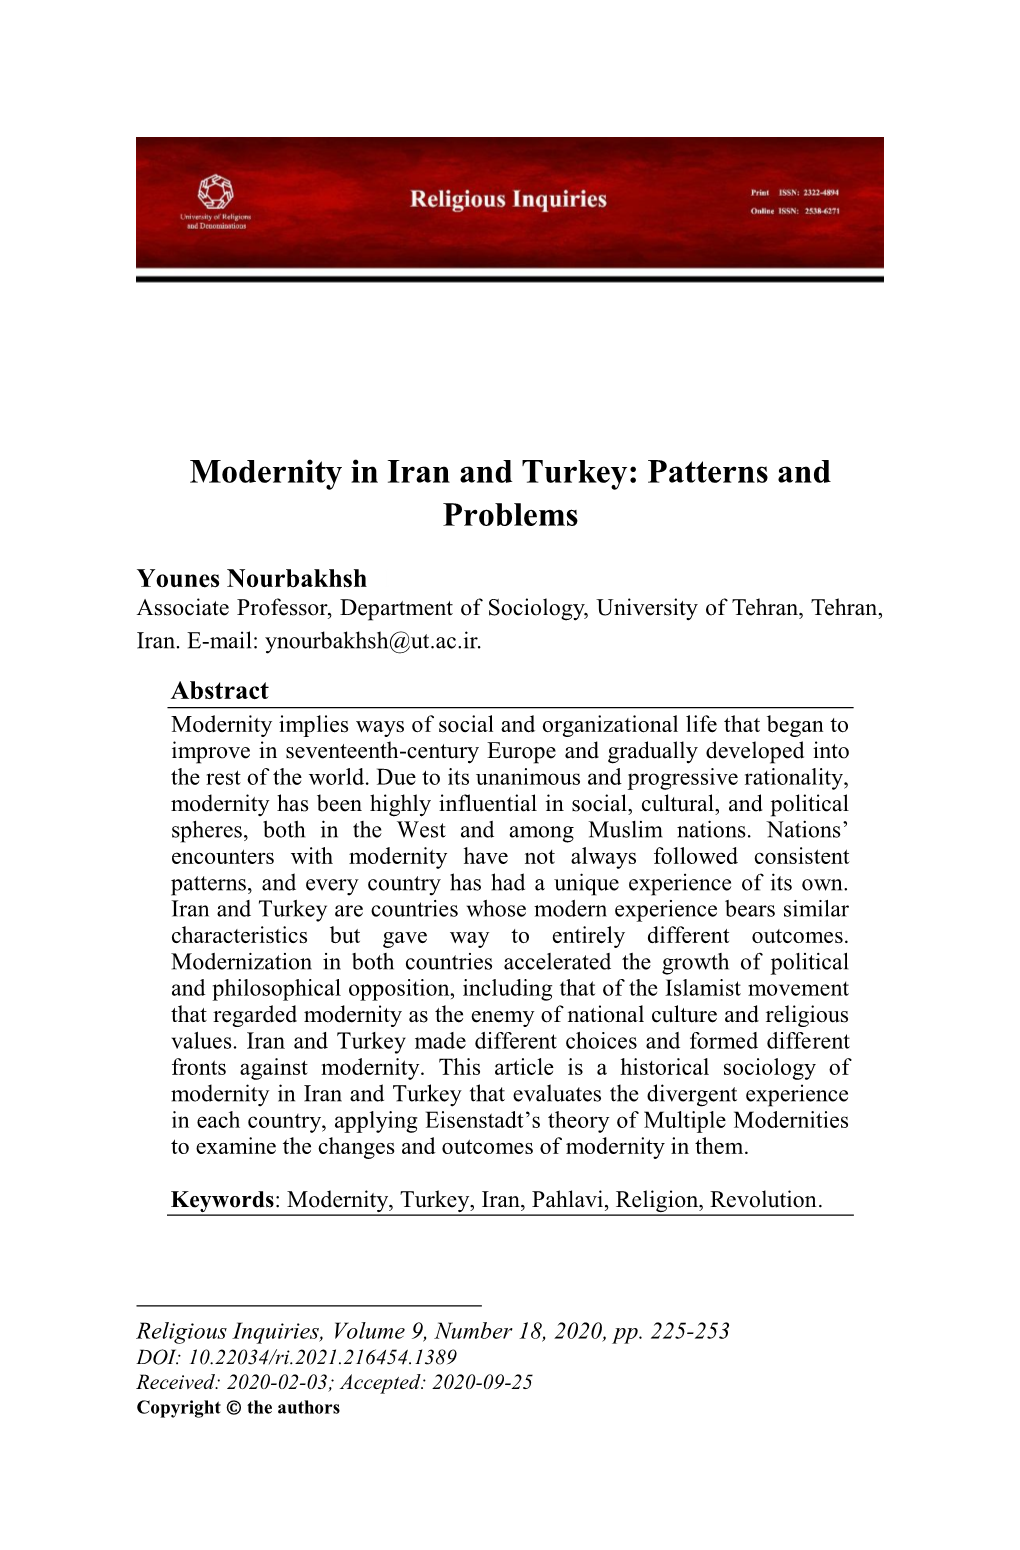 Modernity in Iran and Turkey: Patterns and Problems